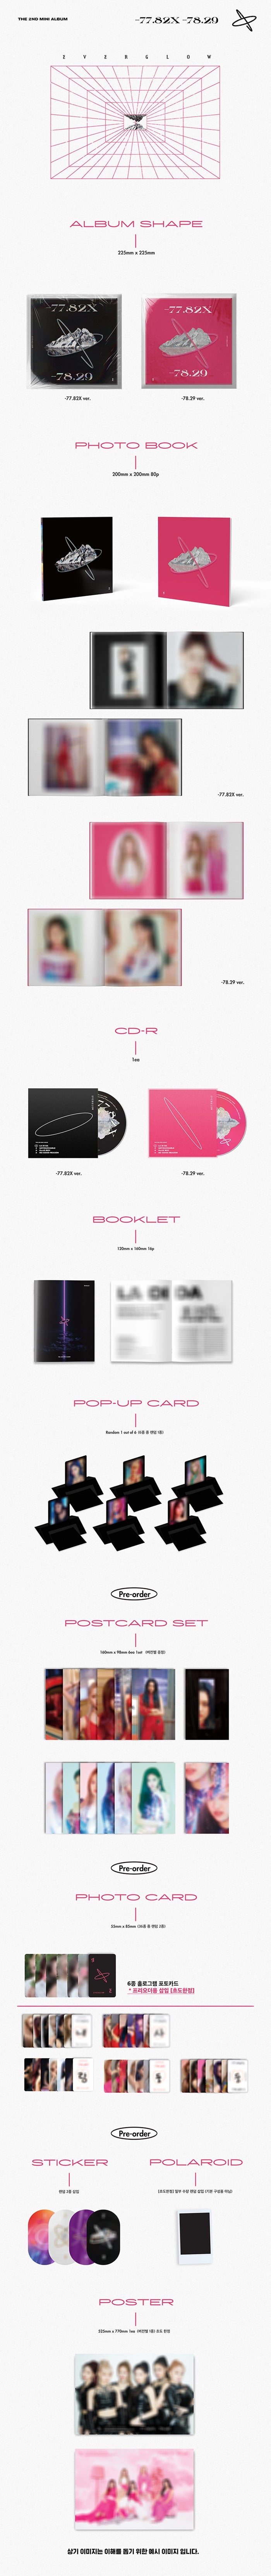 1 CD
1 Photo Book (80 pages)
1 Booklet (16 pages)
1 Pop-up Card